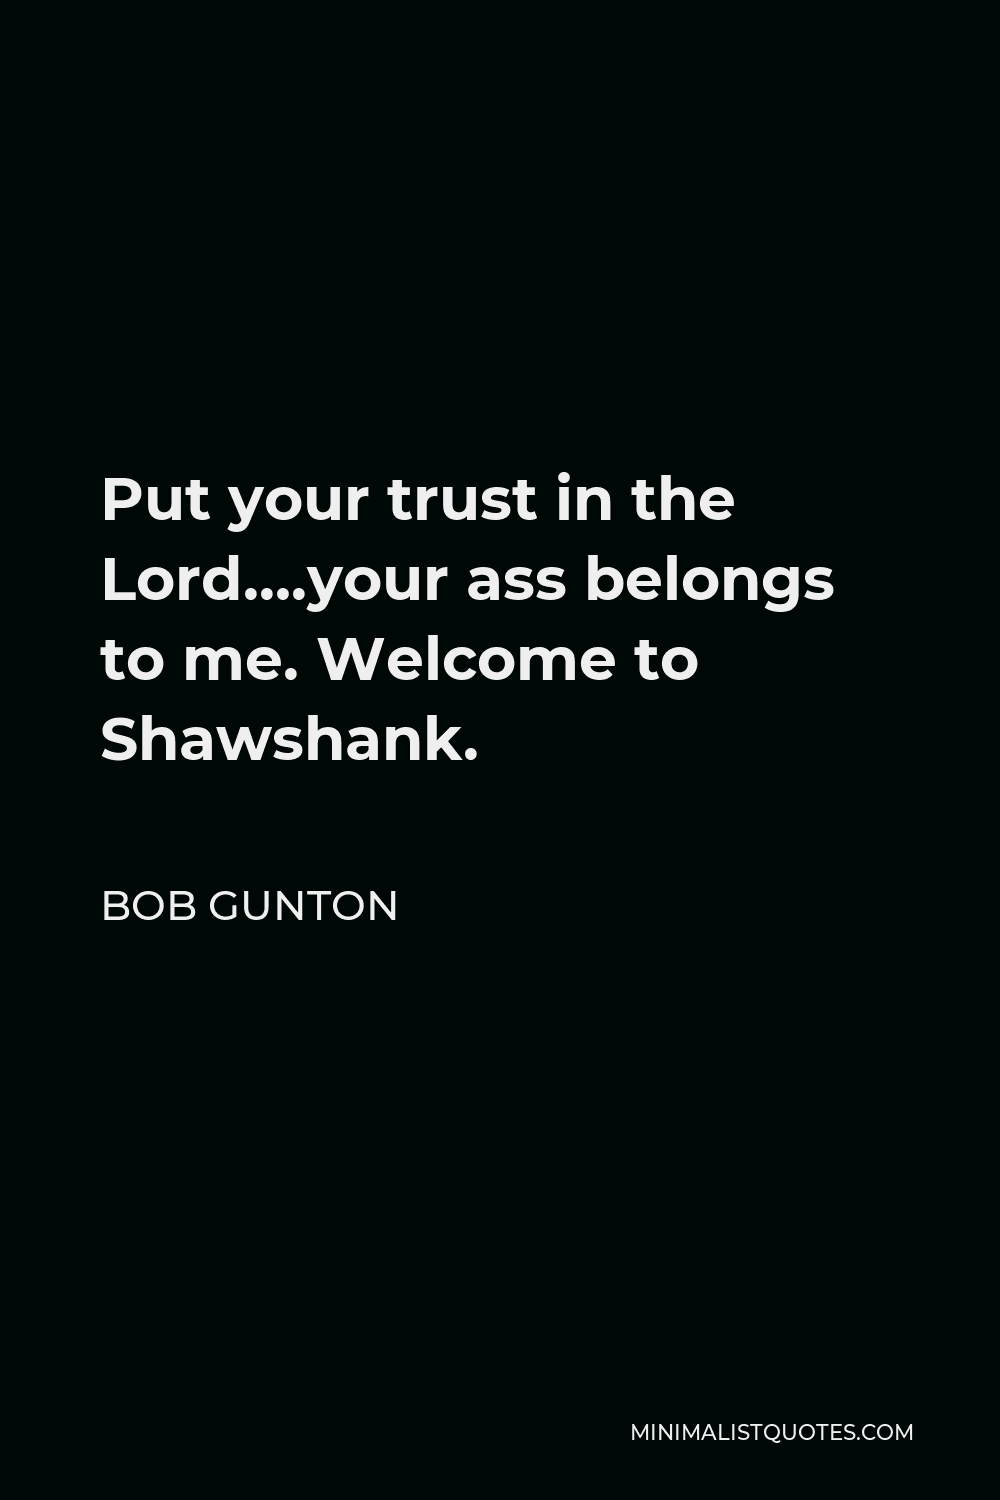 Bob Gunton Quote - Put your trust in the Lord….your ass belongs to me. Welcome to Shawshank.